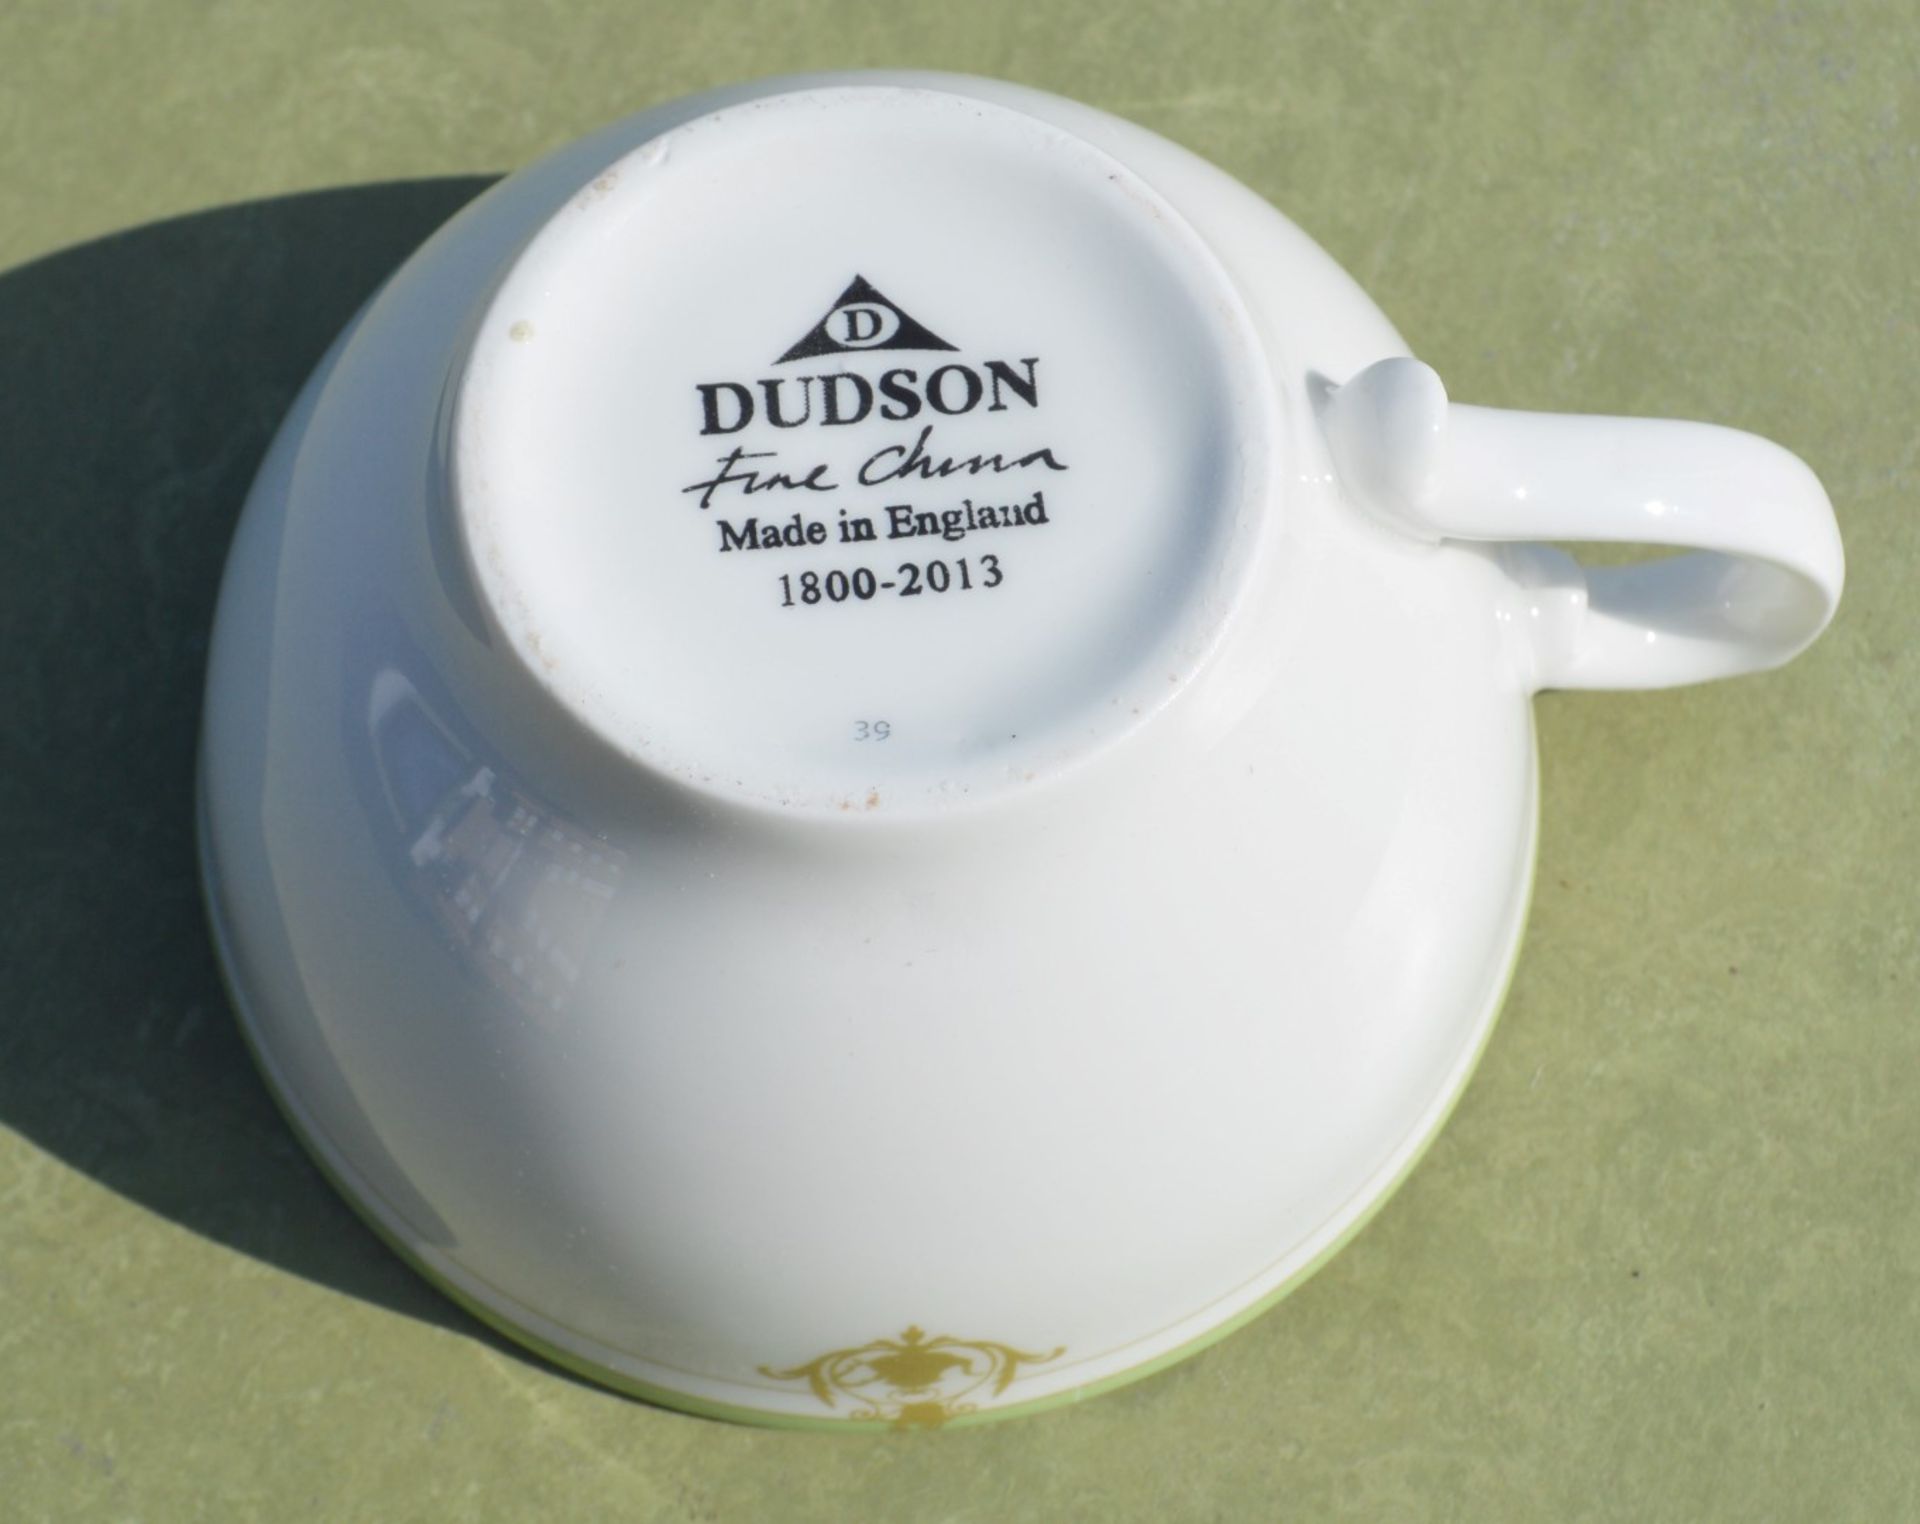 36 x DUDSON Fine China 'Georgian' Low Tea Cups With With Saucers All Featuring 'Famous Branding' - - Image 2 of 9